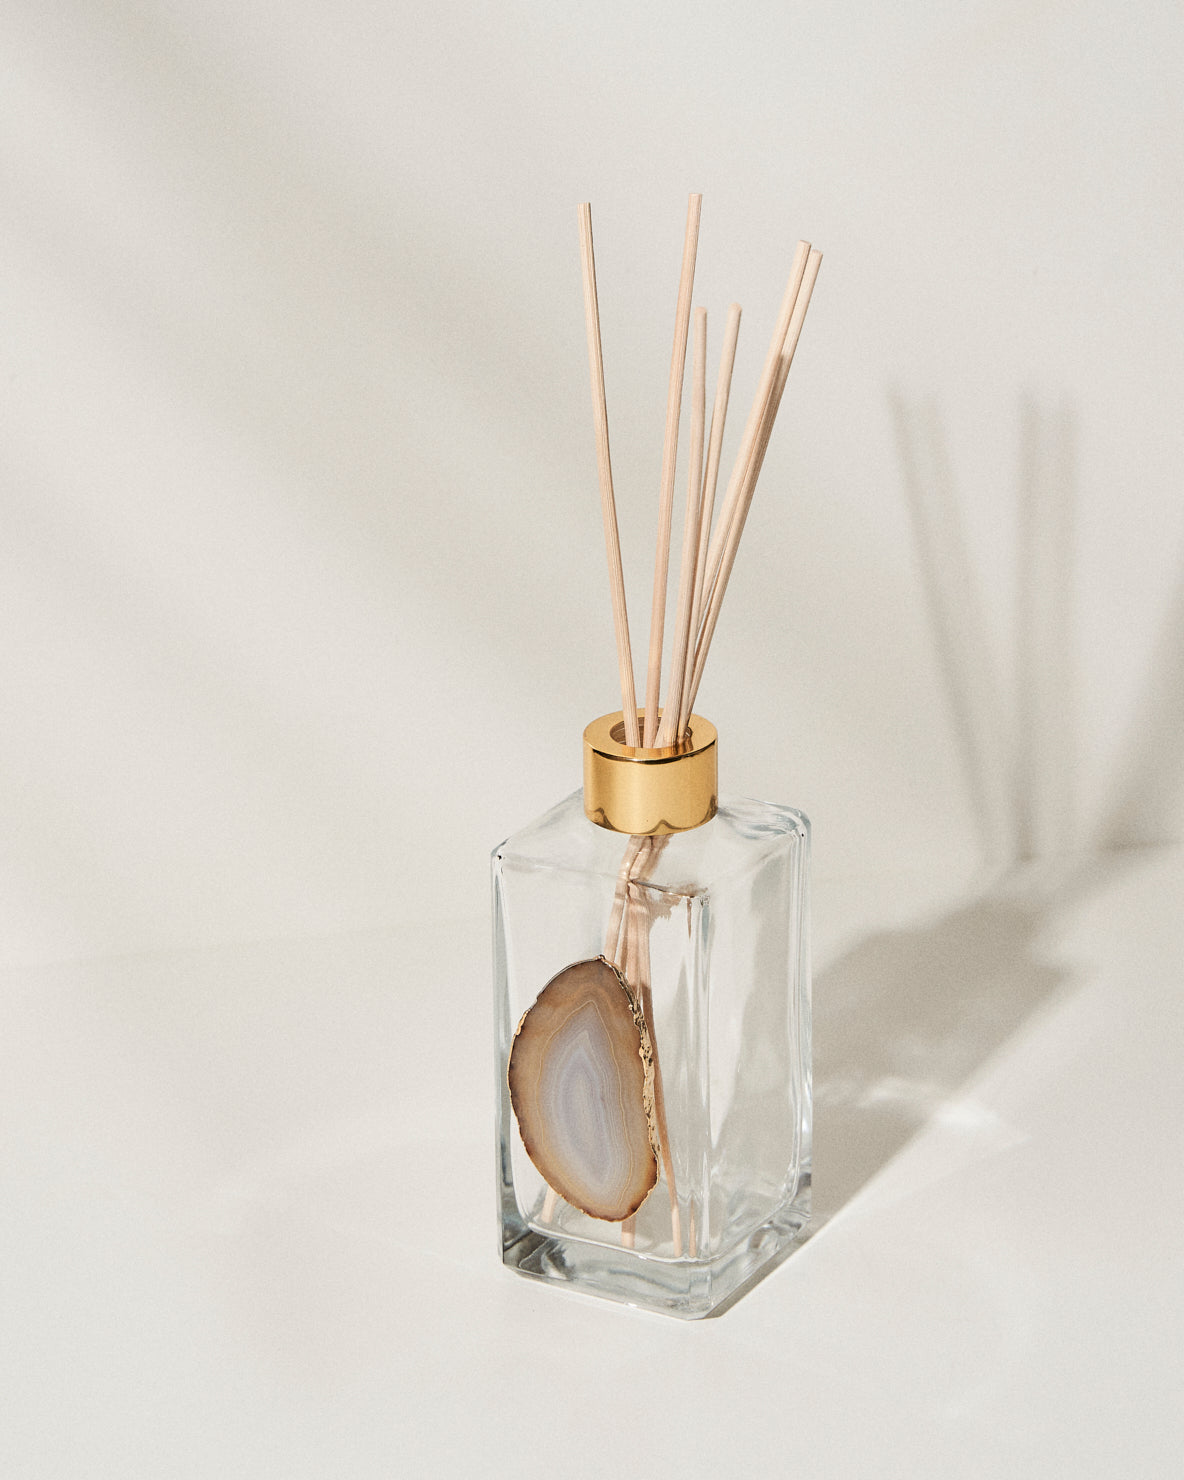 Gold Plated Agate Stone Diffuser with Reed Sticks | Elegant Home Decor | Fragrance Blend Holder | Hand Forged Glass Vessel | Aromatherapy Essential Oil Diffuser | Stylish and Functional | Approx. 5” x 3”